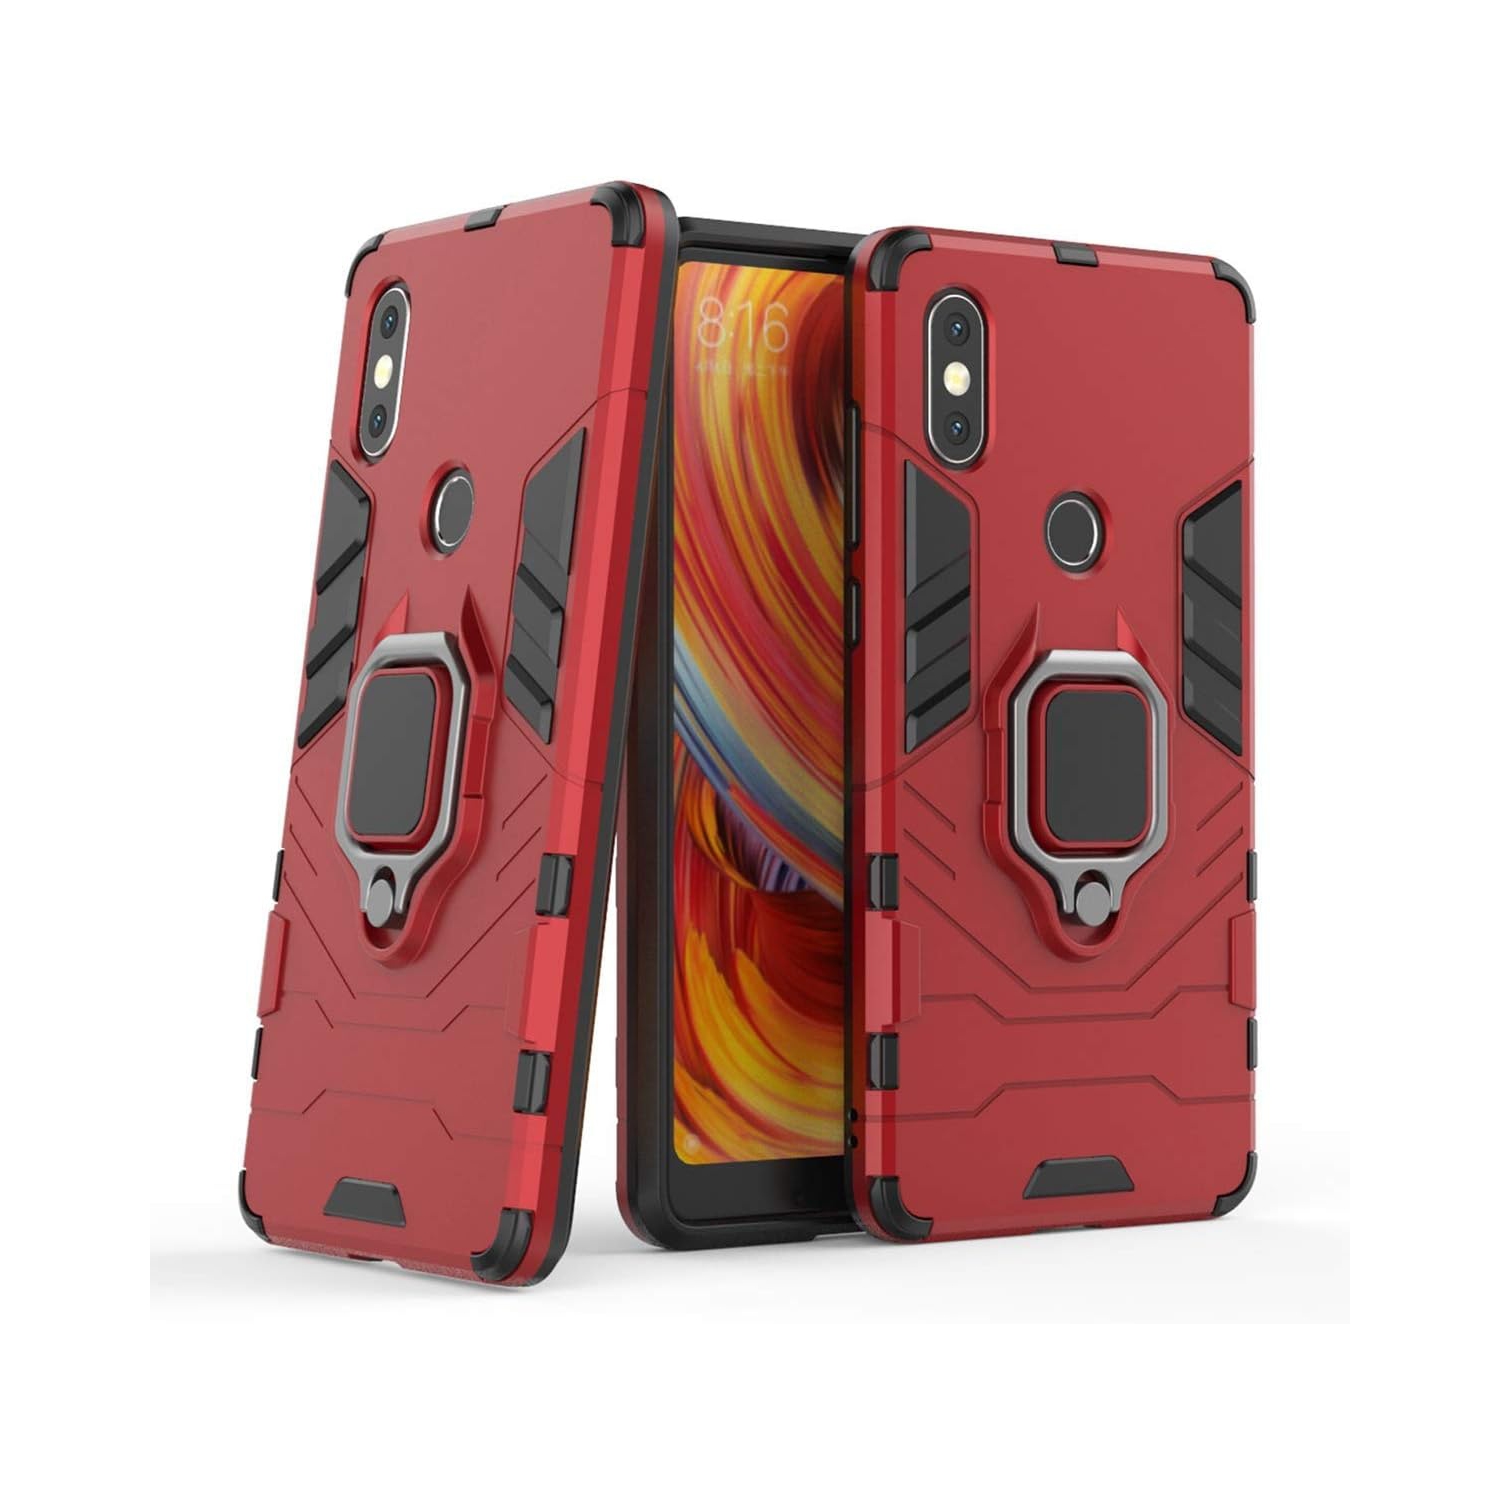 Compatible with Xiaomi Mi Mix 2S Case, Metal Ring Grip Kickstand Shockproof Hard Bumper Shell (Works with Magnetic Car